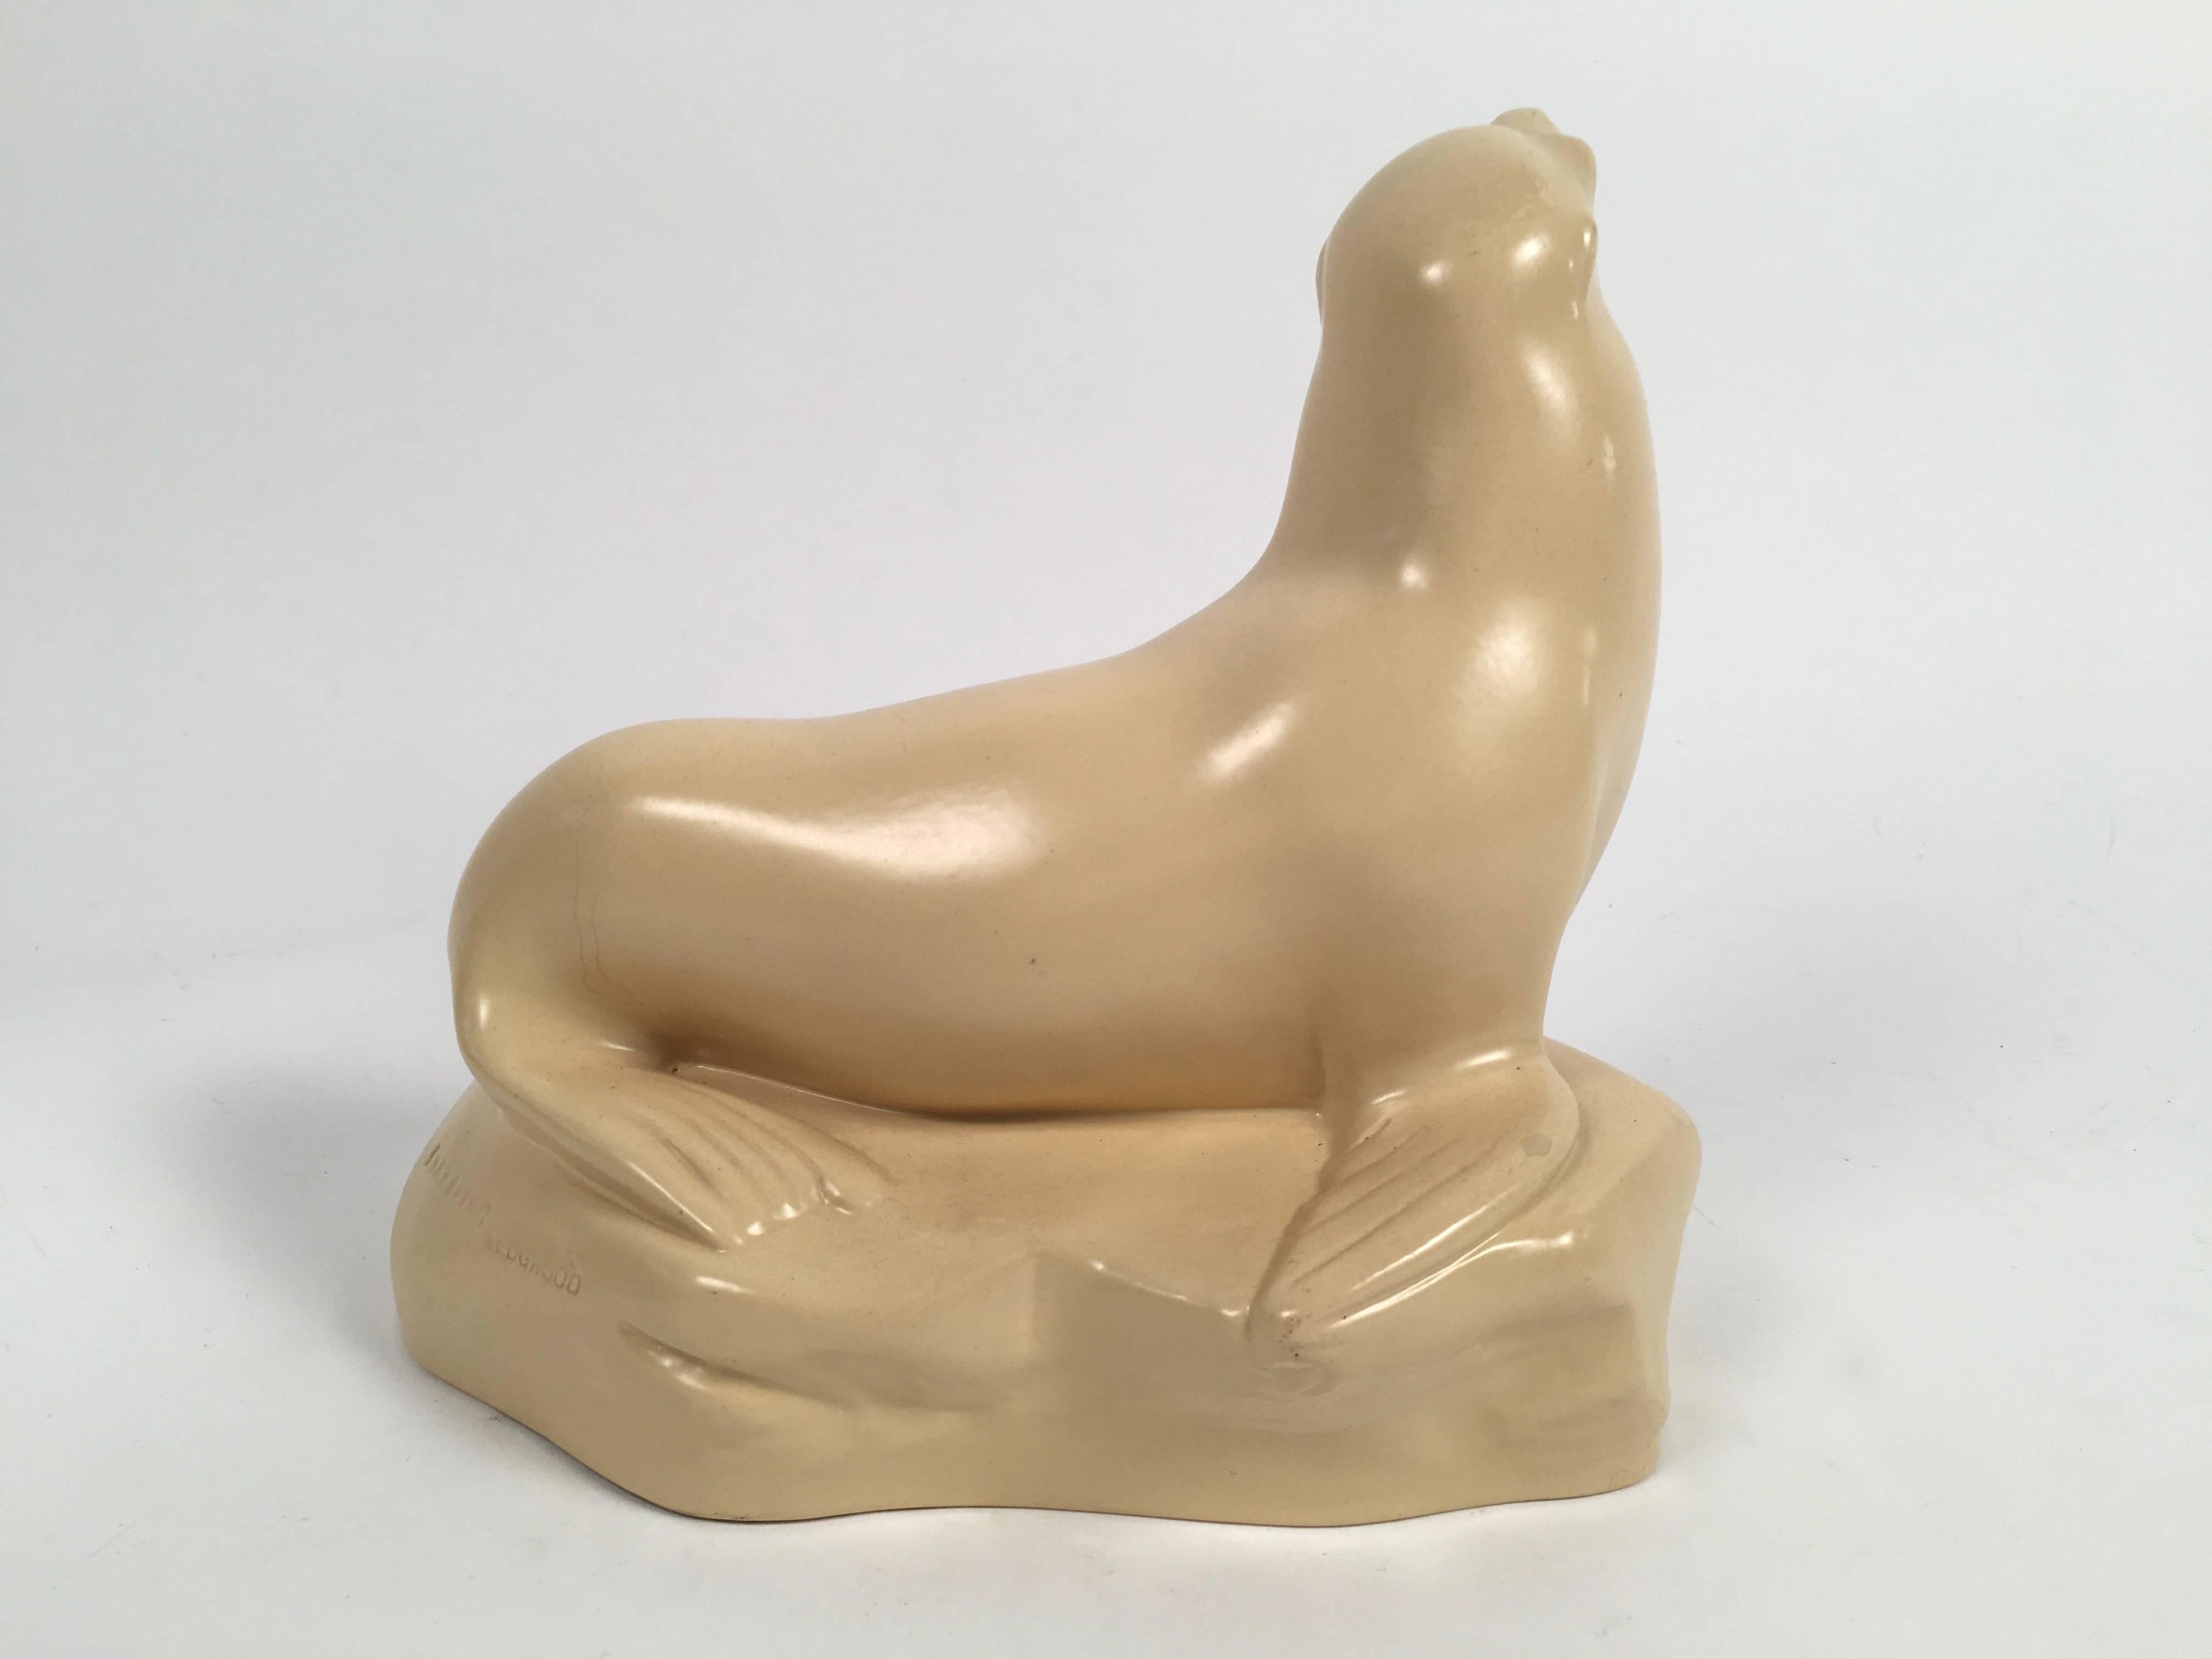 A Wedgwood pottery sculpture of a sea lion, or seal, with a matte straw glaze, beautifully modeled by John Skeaping in 1927 and made by Wedgwood and Sons, Barlaston, England, circa 1935. Signed with impressed signature and marks on back of base.